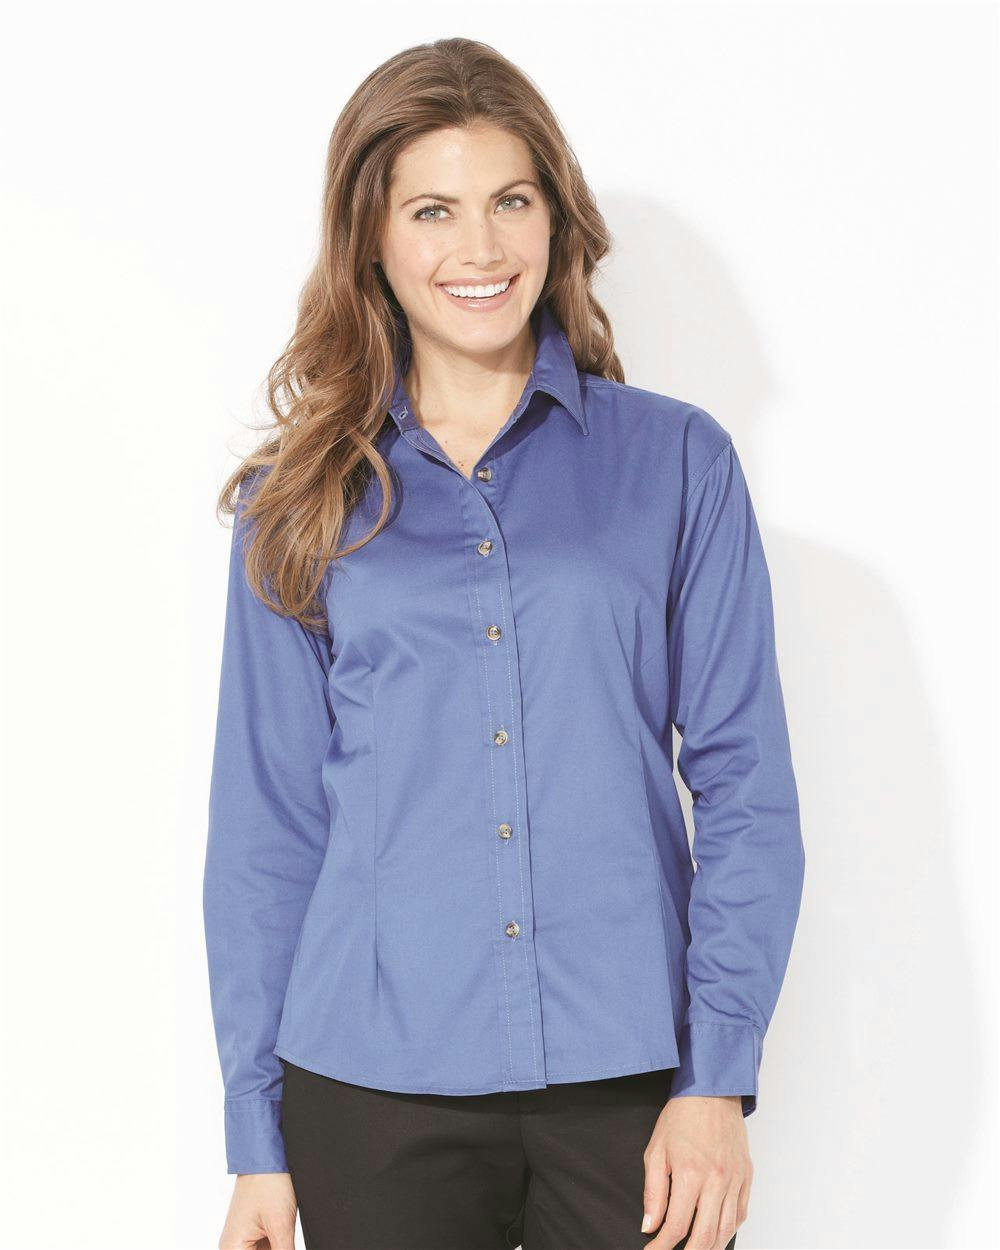 Image for Women's Long Sleeve Stain-Resistant Tapered Twill Shirt - 5283